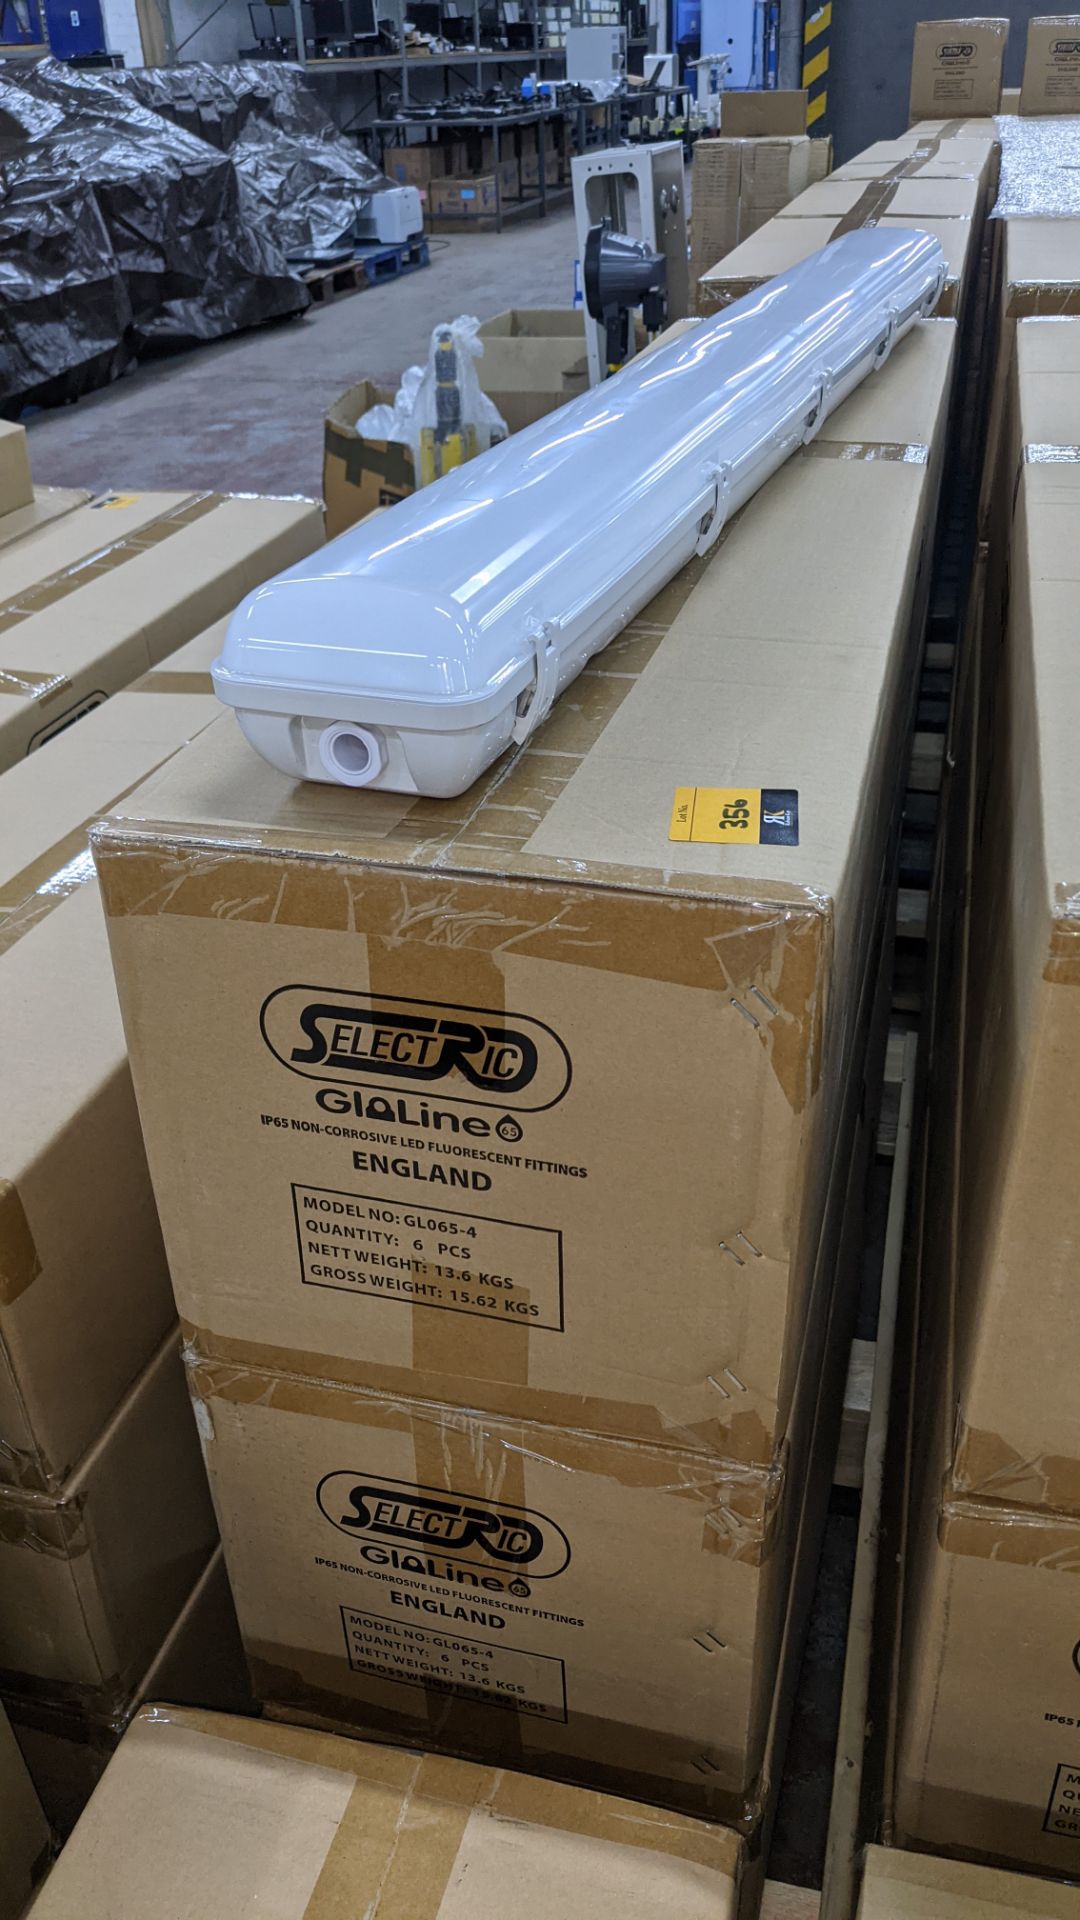 18 off IP65 non-corrosive LED fluorescent light fittings. Model GLO65-4, 4', twin LED 40W, polycarb - Image 2 of 6